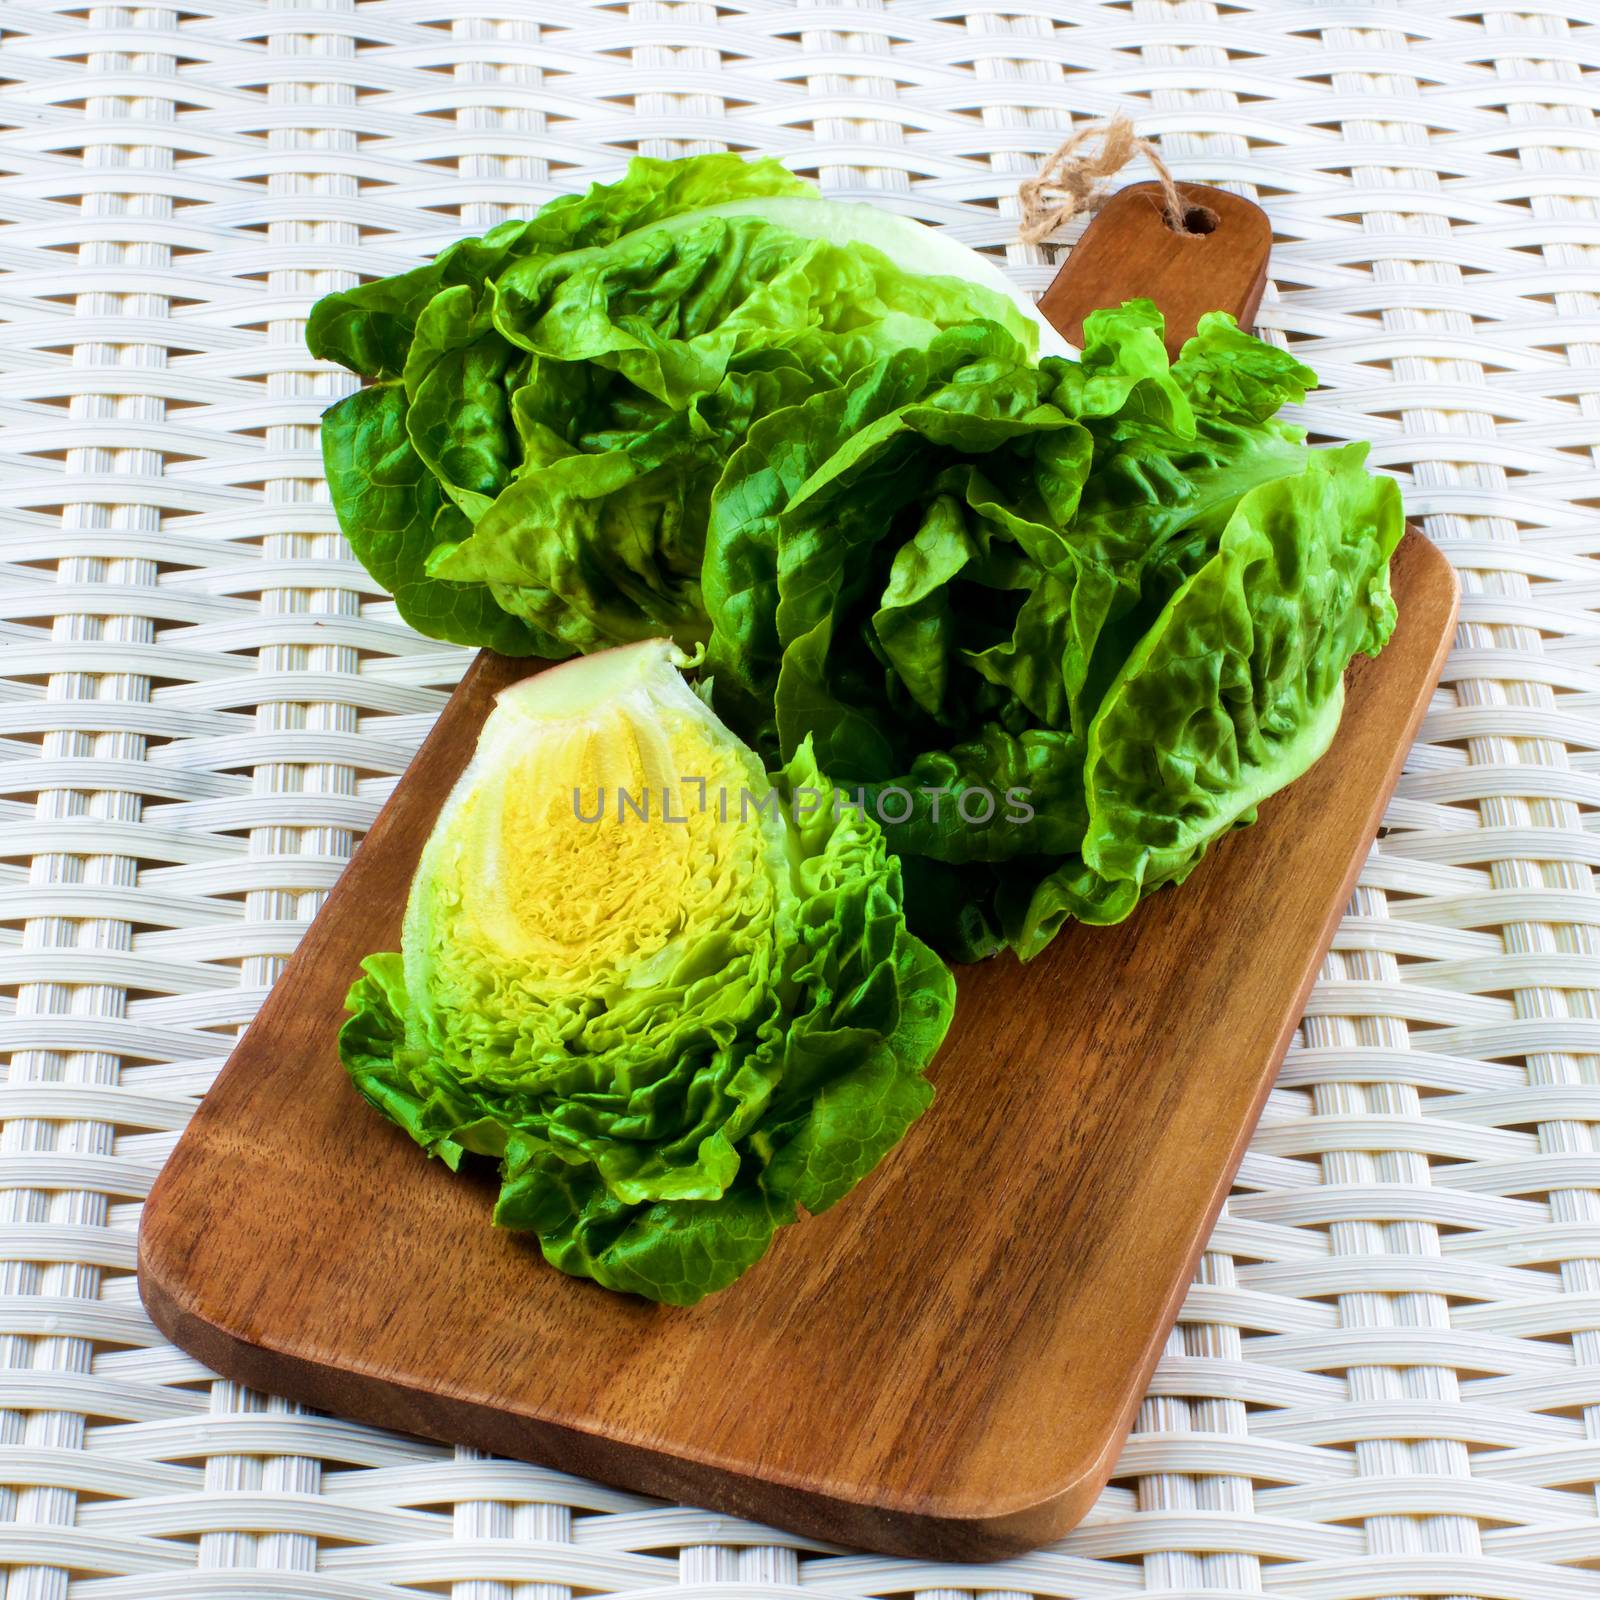 Fresh Crunchy Romaine Lettuce Full Head and Half on Wooden Cutting Board closeup on Wicker background